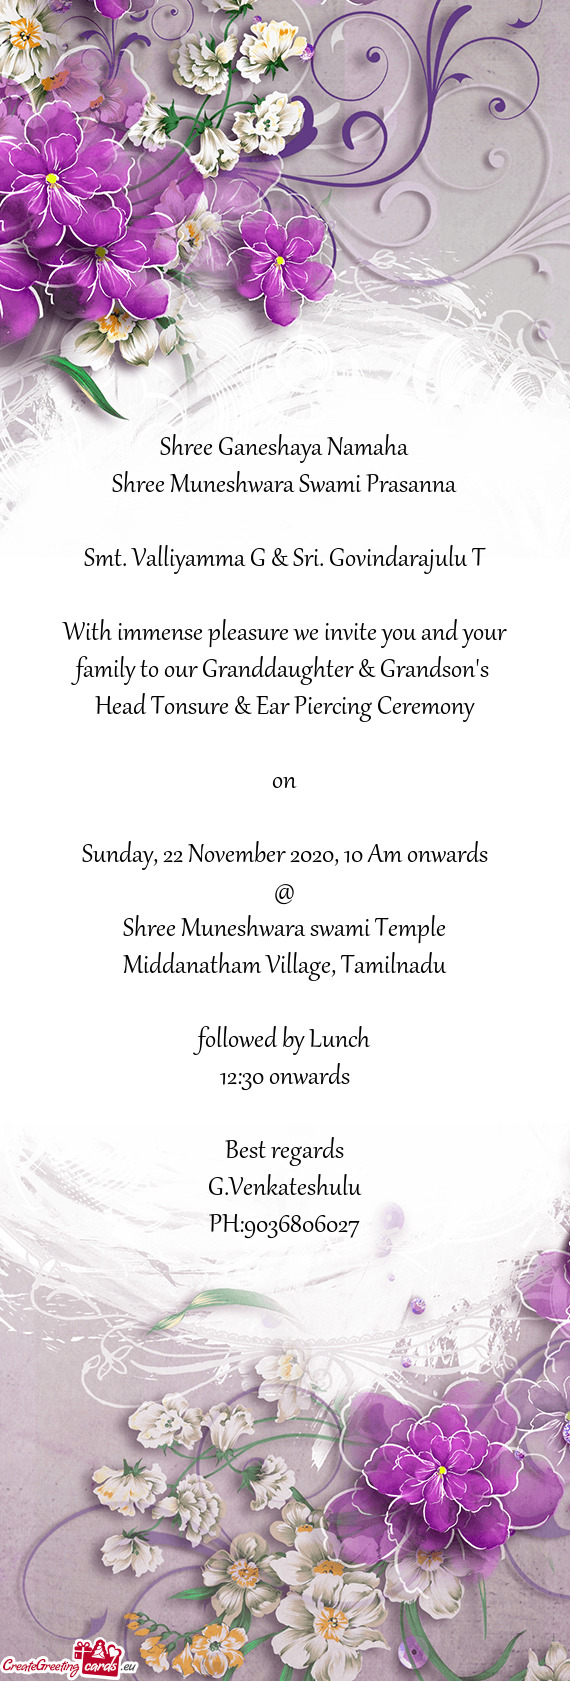 With immense pleasure we invite you and your family to our Granddaughter & Grandson